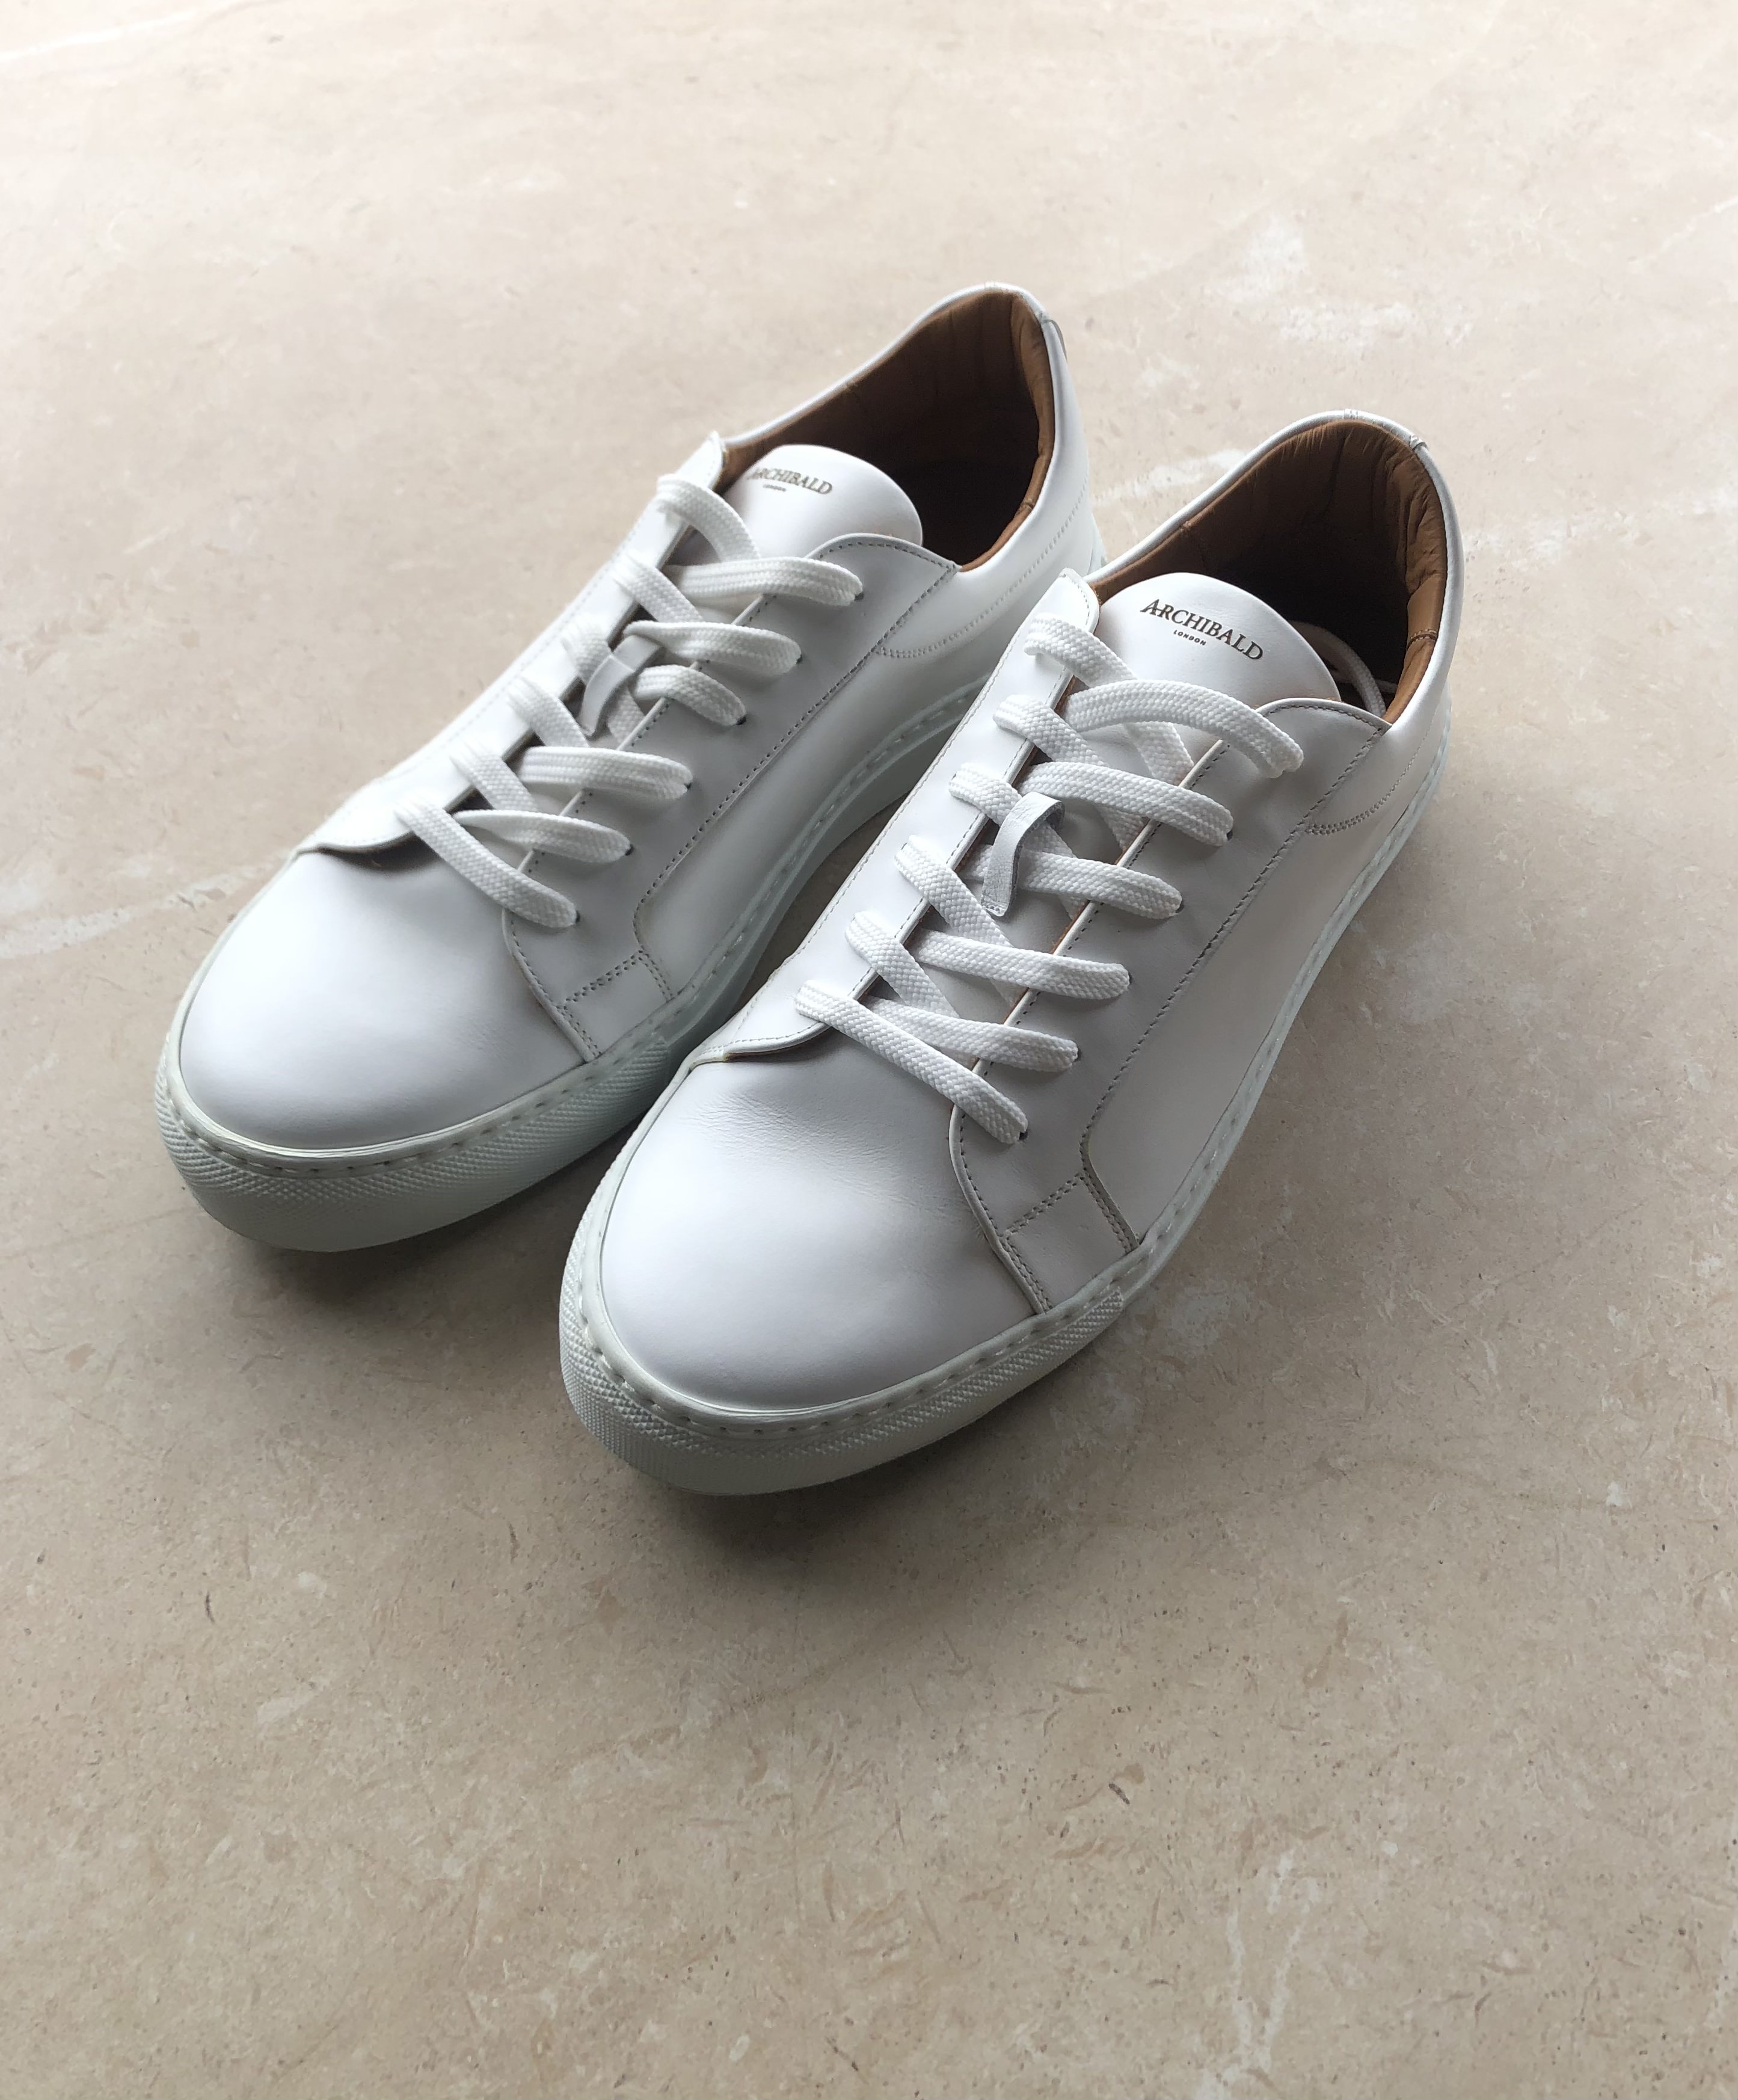 Ghirlandina v4 Low Top Leather Sneakers - White Calfskin, White Sole ...